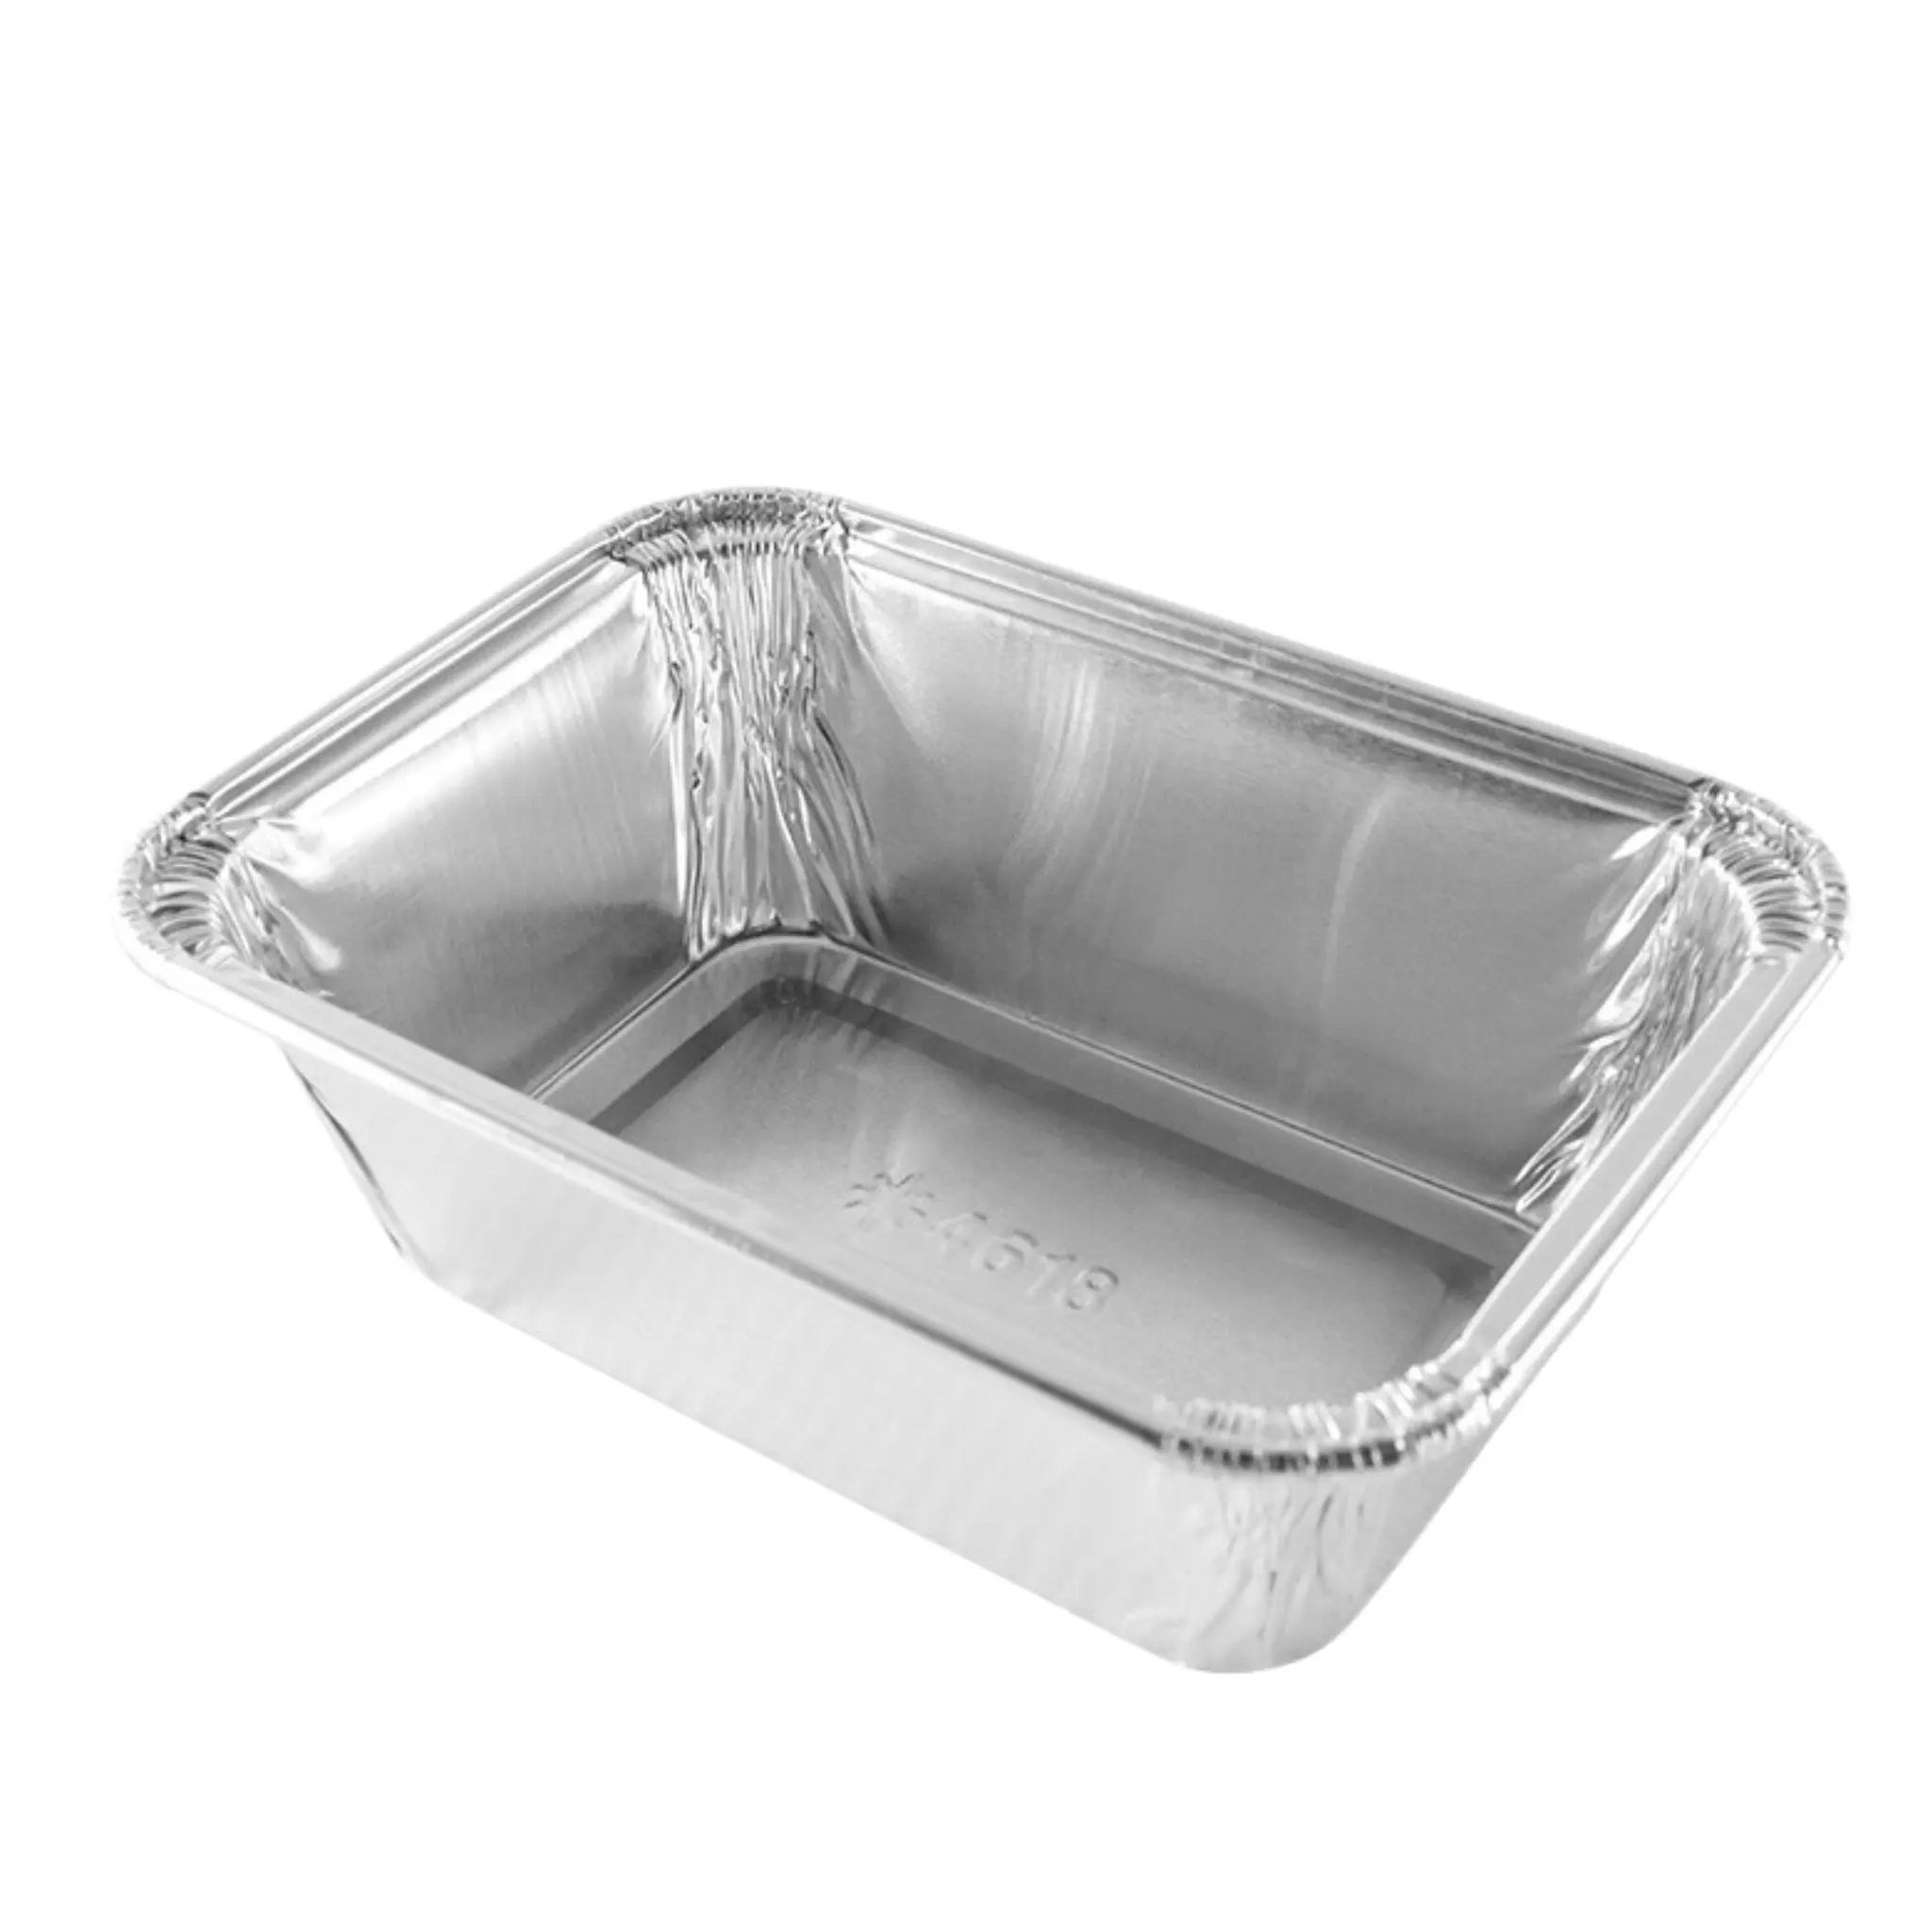 Rectangle Takeaway Star Products No.4618 Foil Container Food Aluminium Foil Tray Size 160 ml. Microwave Save Bakery Packing